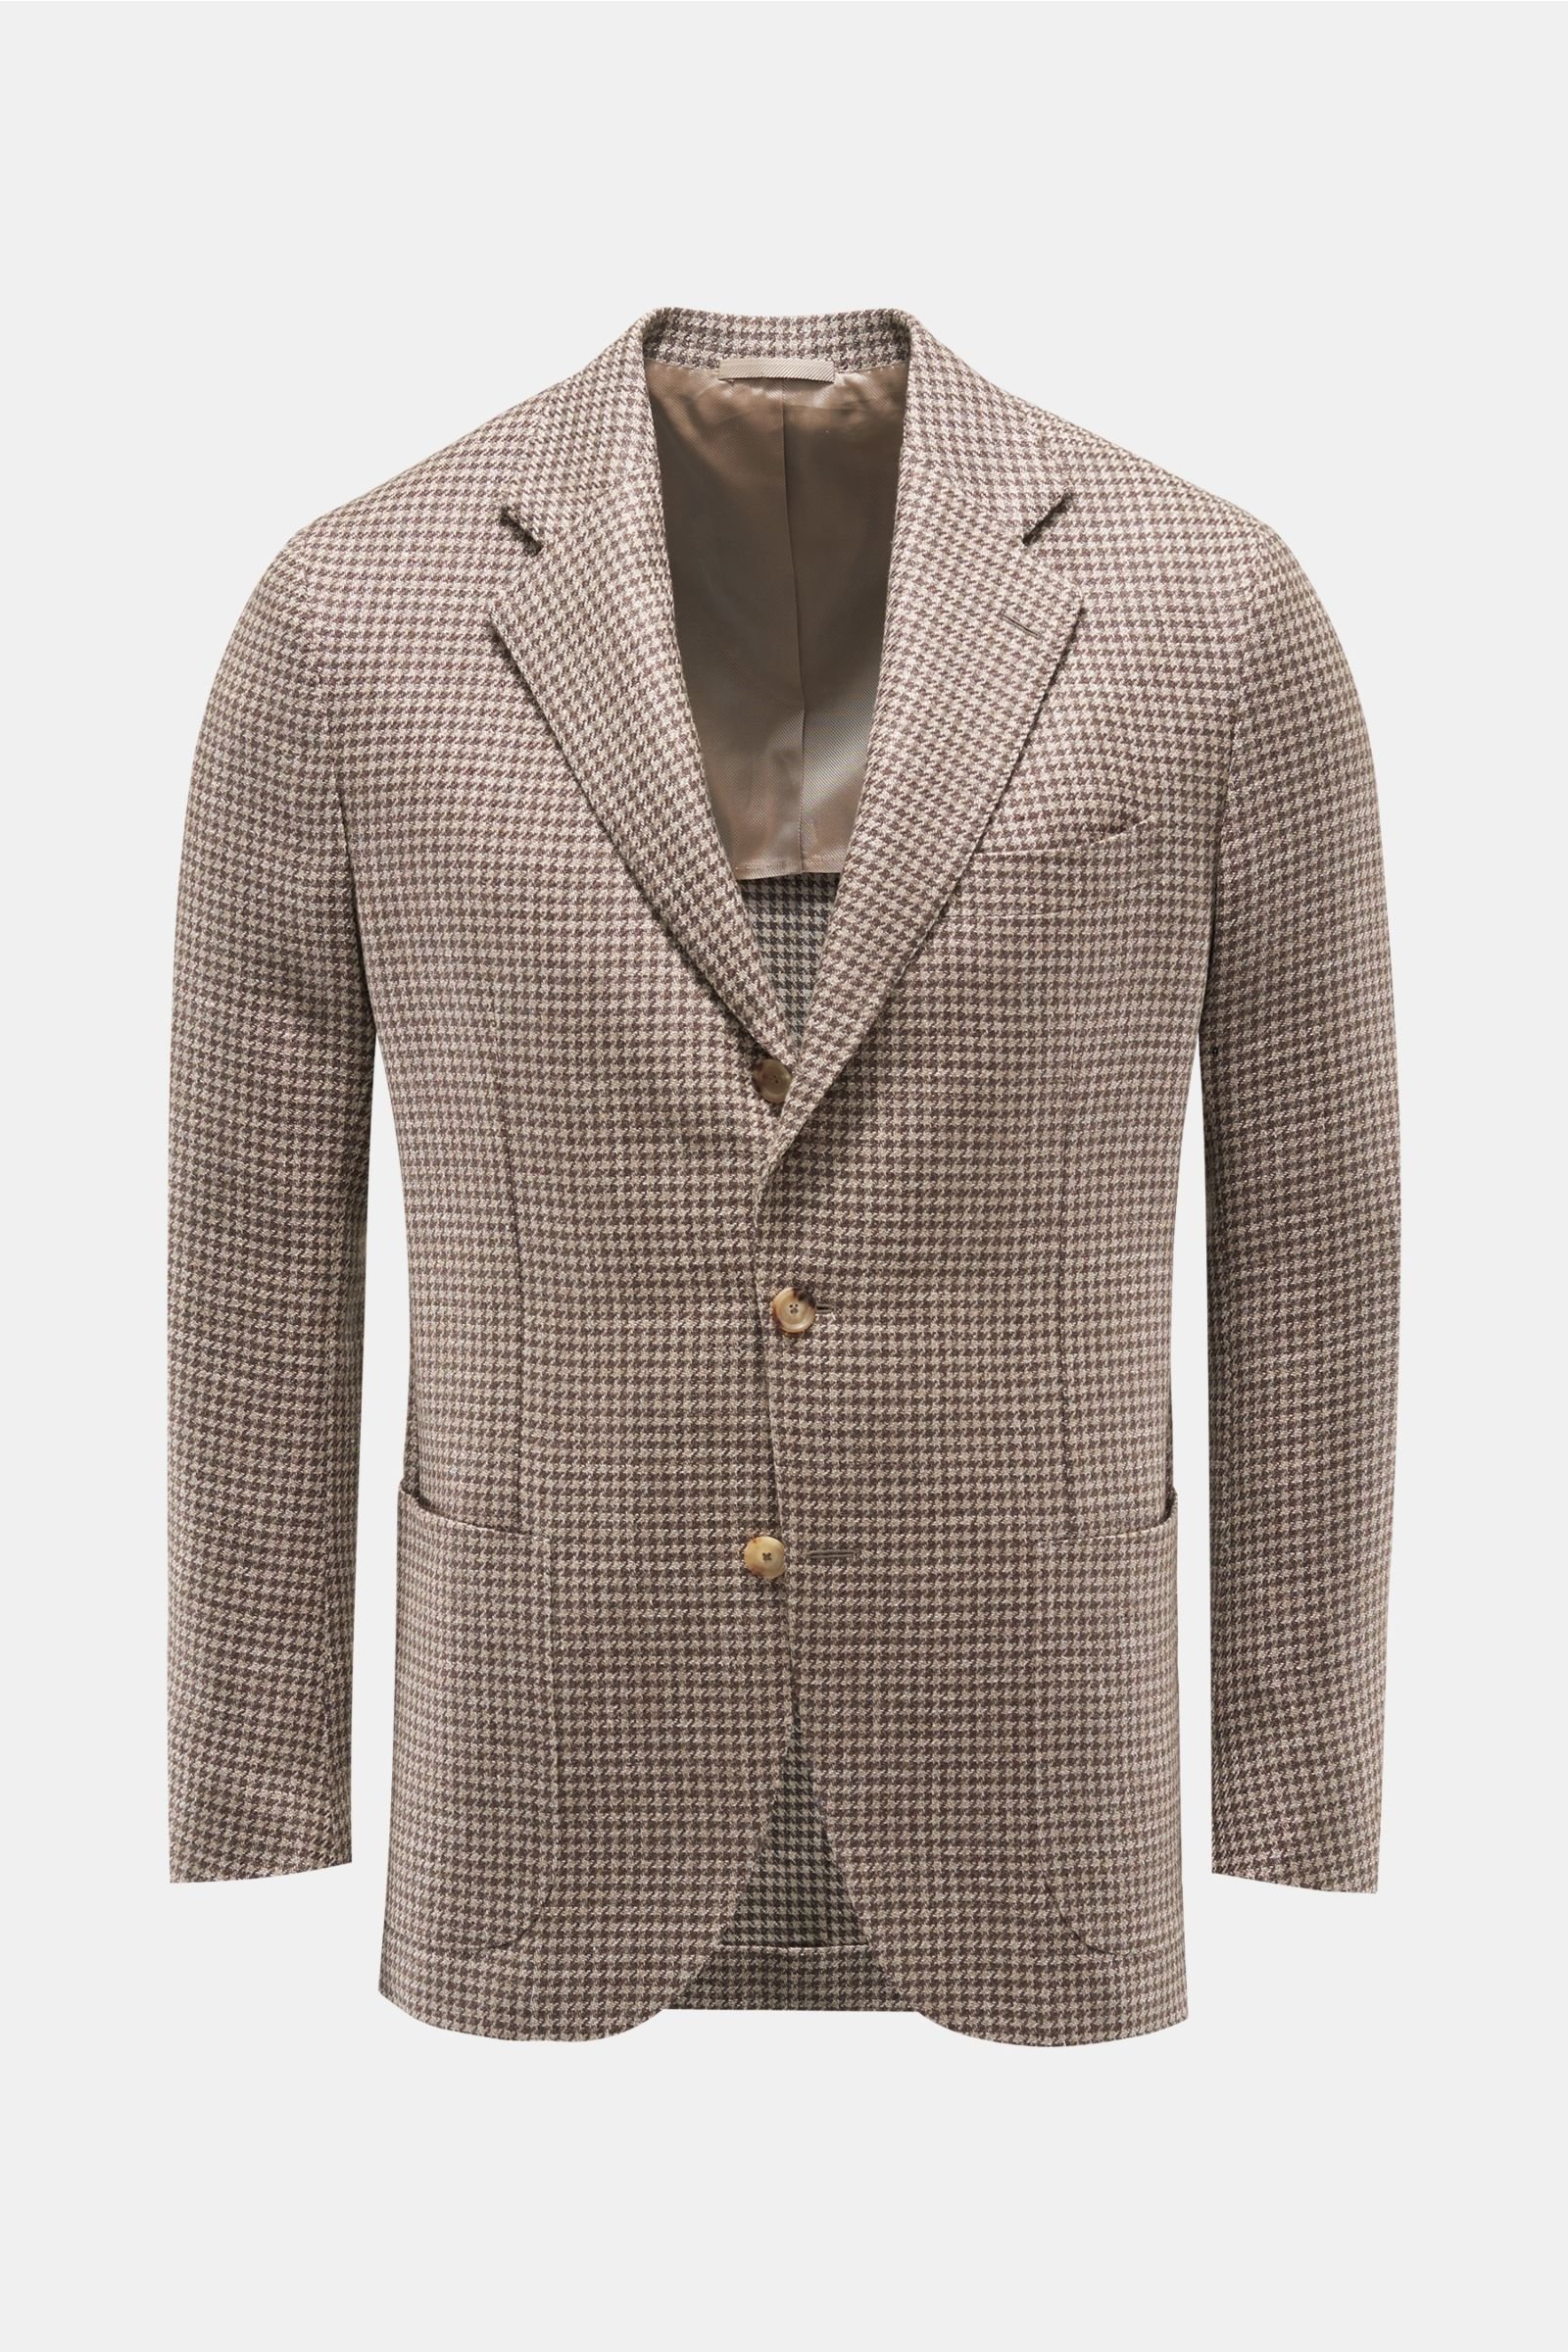 Smart-casual jacket 'Posillipo' beige/brown checked